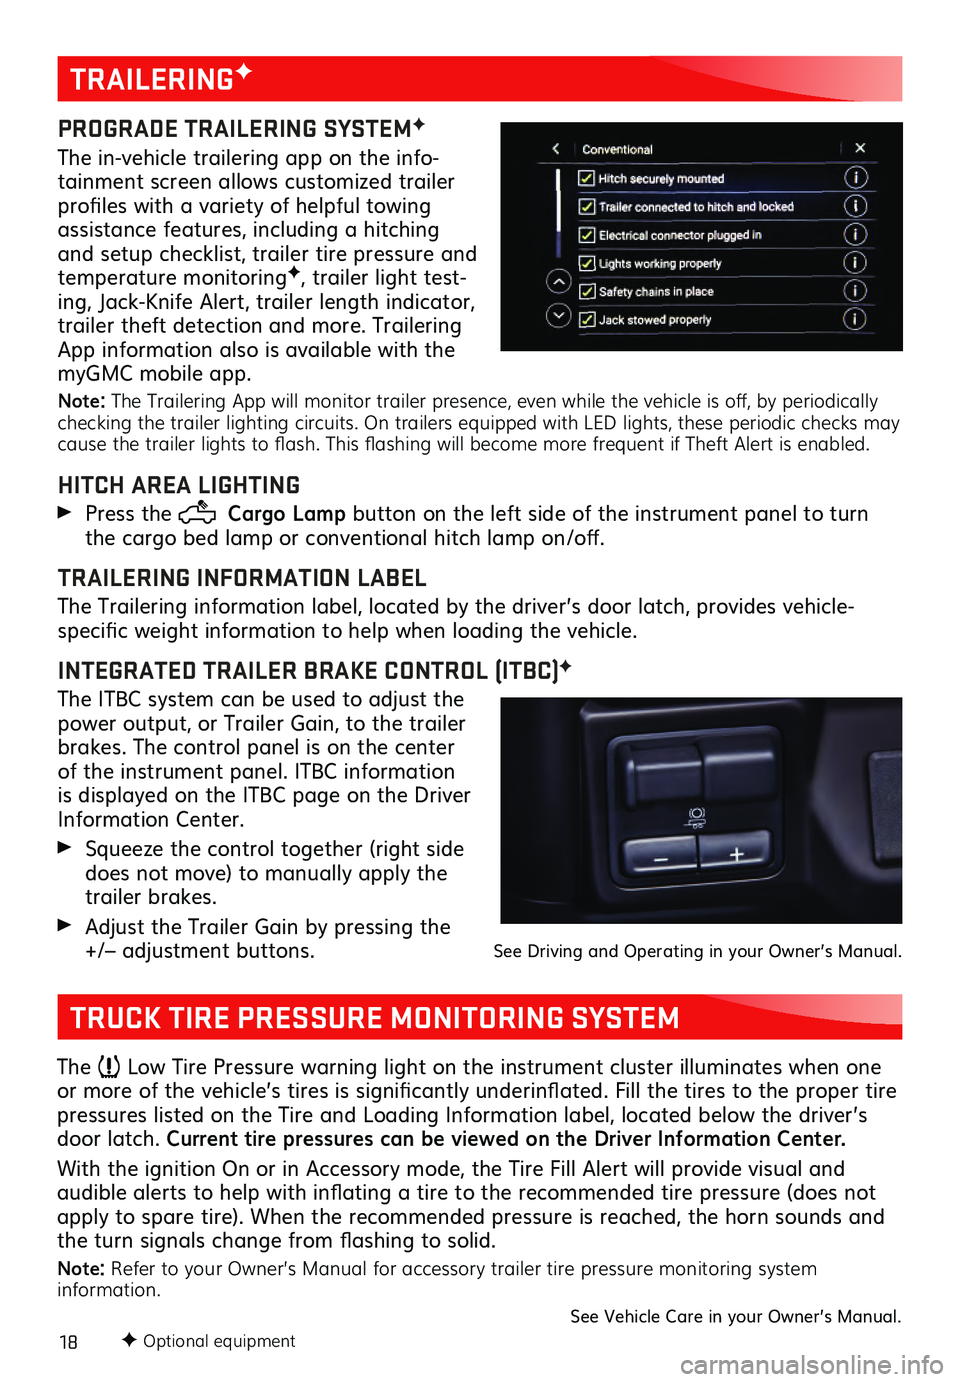 GMC SIERRA 2021  Get To Know Guide 18F Optional equipment
TRAILERINGF 
PROGRADE TRAILERING SYSTEMF
The in-vehicle trailering app on the info-
tainment screen allows customized trailer 
profiles with a variety of helpful towing 
assista